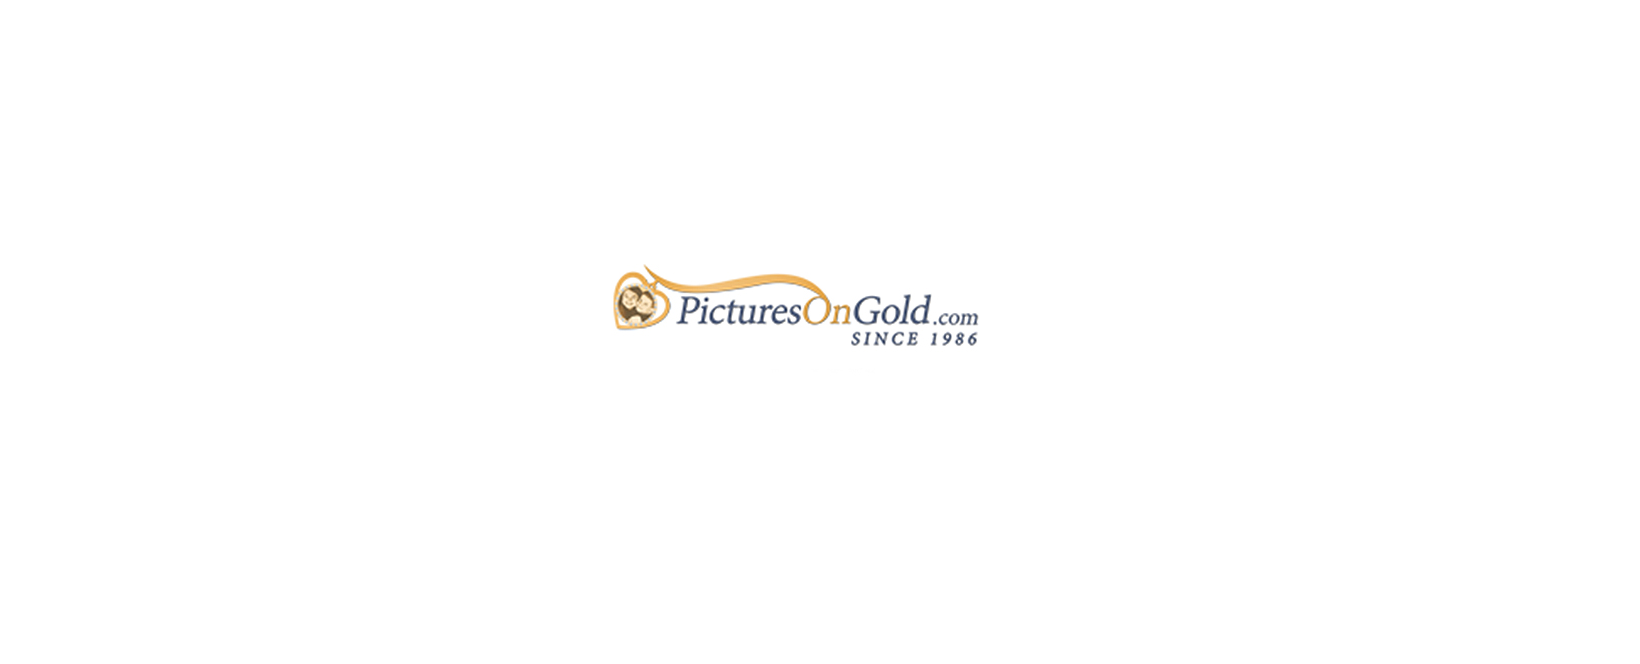 PicturesOnGold Discount Code 2022